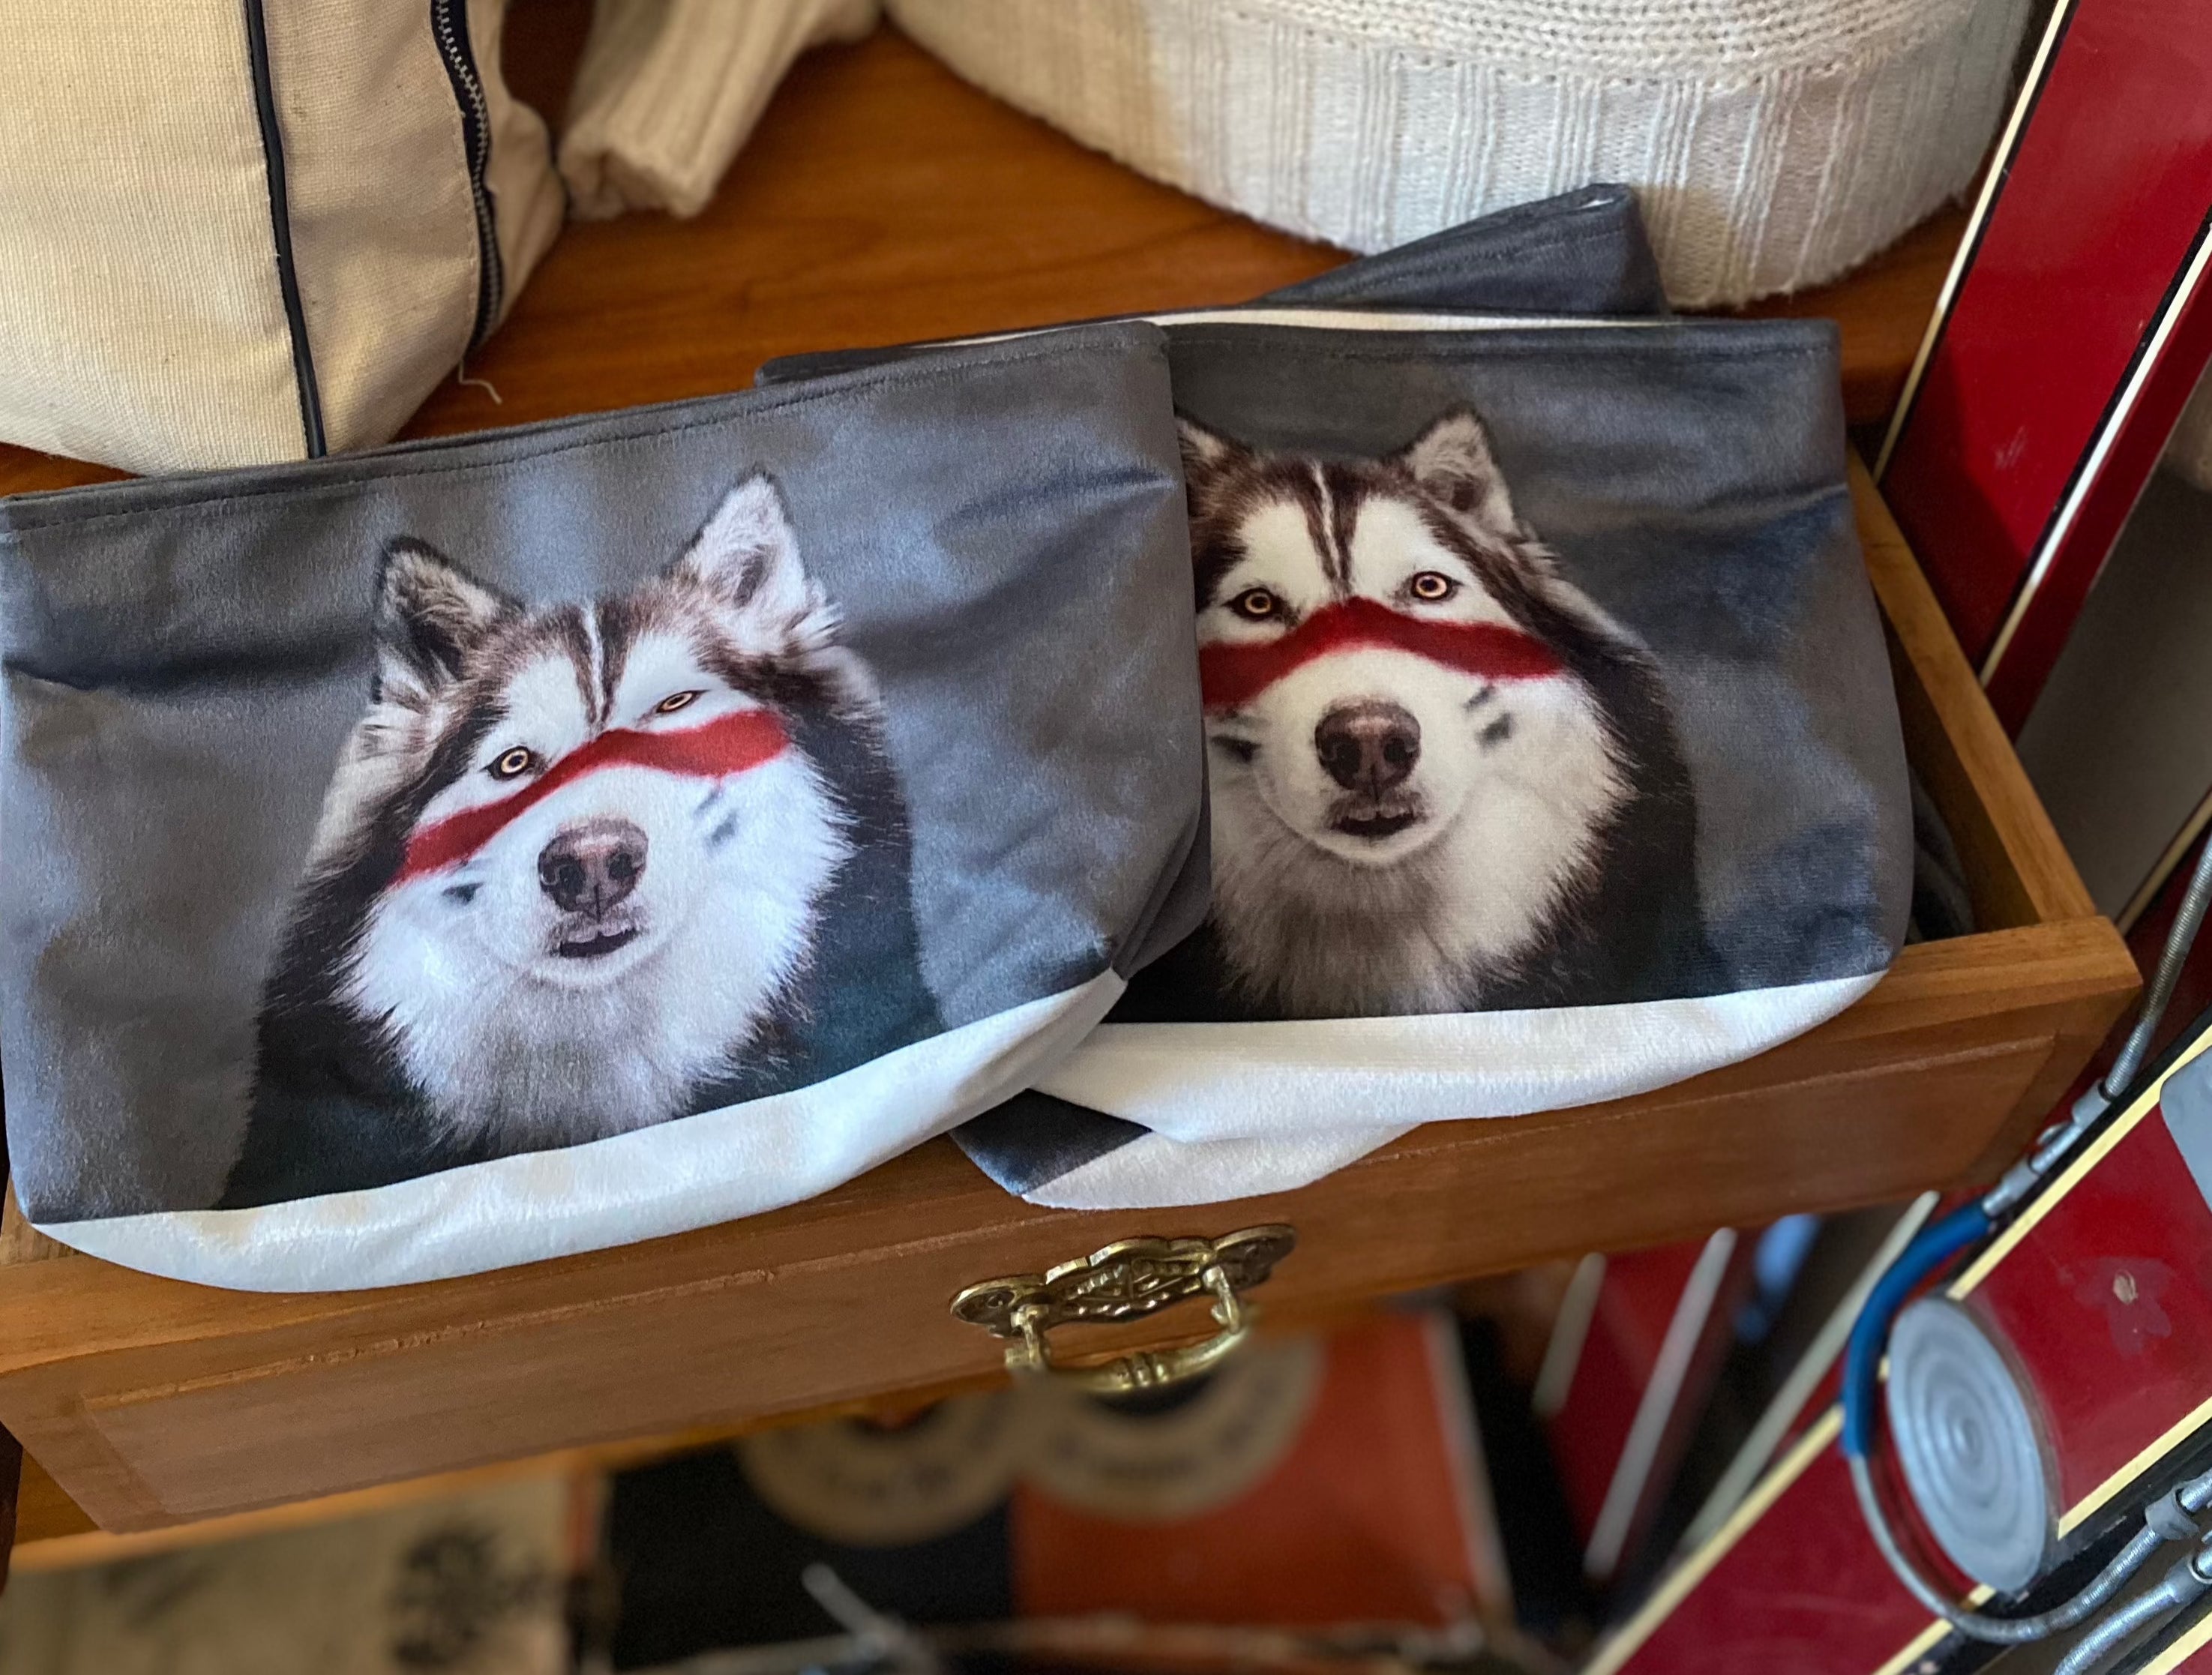 Small pouch or bag sitting on a wooden table printed with a photo of a husky dog with a red stripe across its face on a grey background